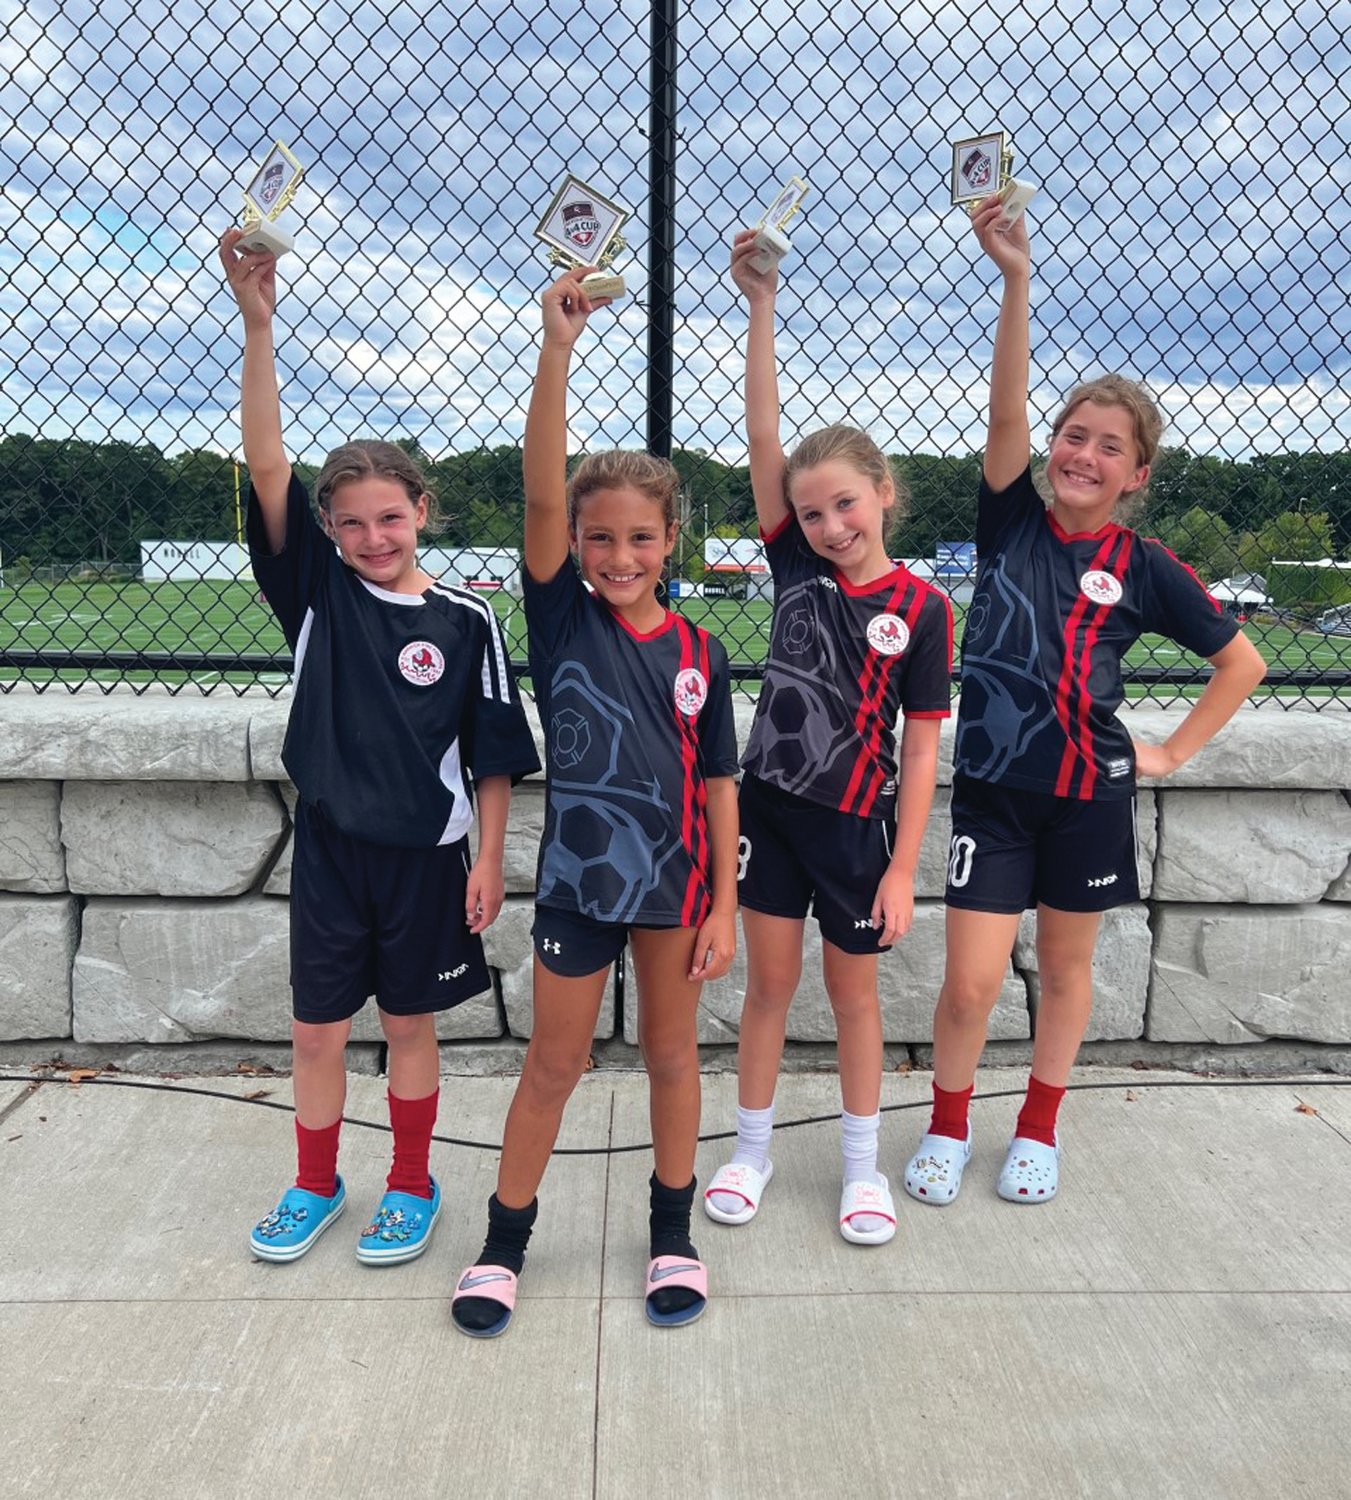 U-10 CHAMPS: The WFFSC U-10 team that won the Revolution tournament included: Julia Krum, Layla Cambio, Gabby Benedetti, Cailin King. (Submitted photos)